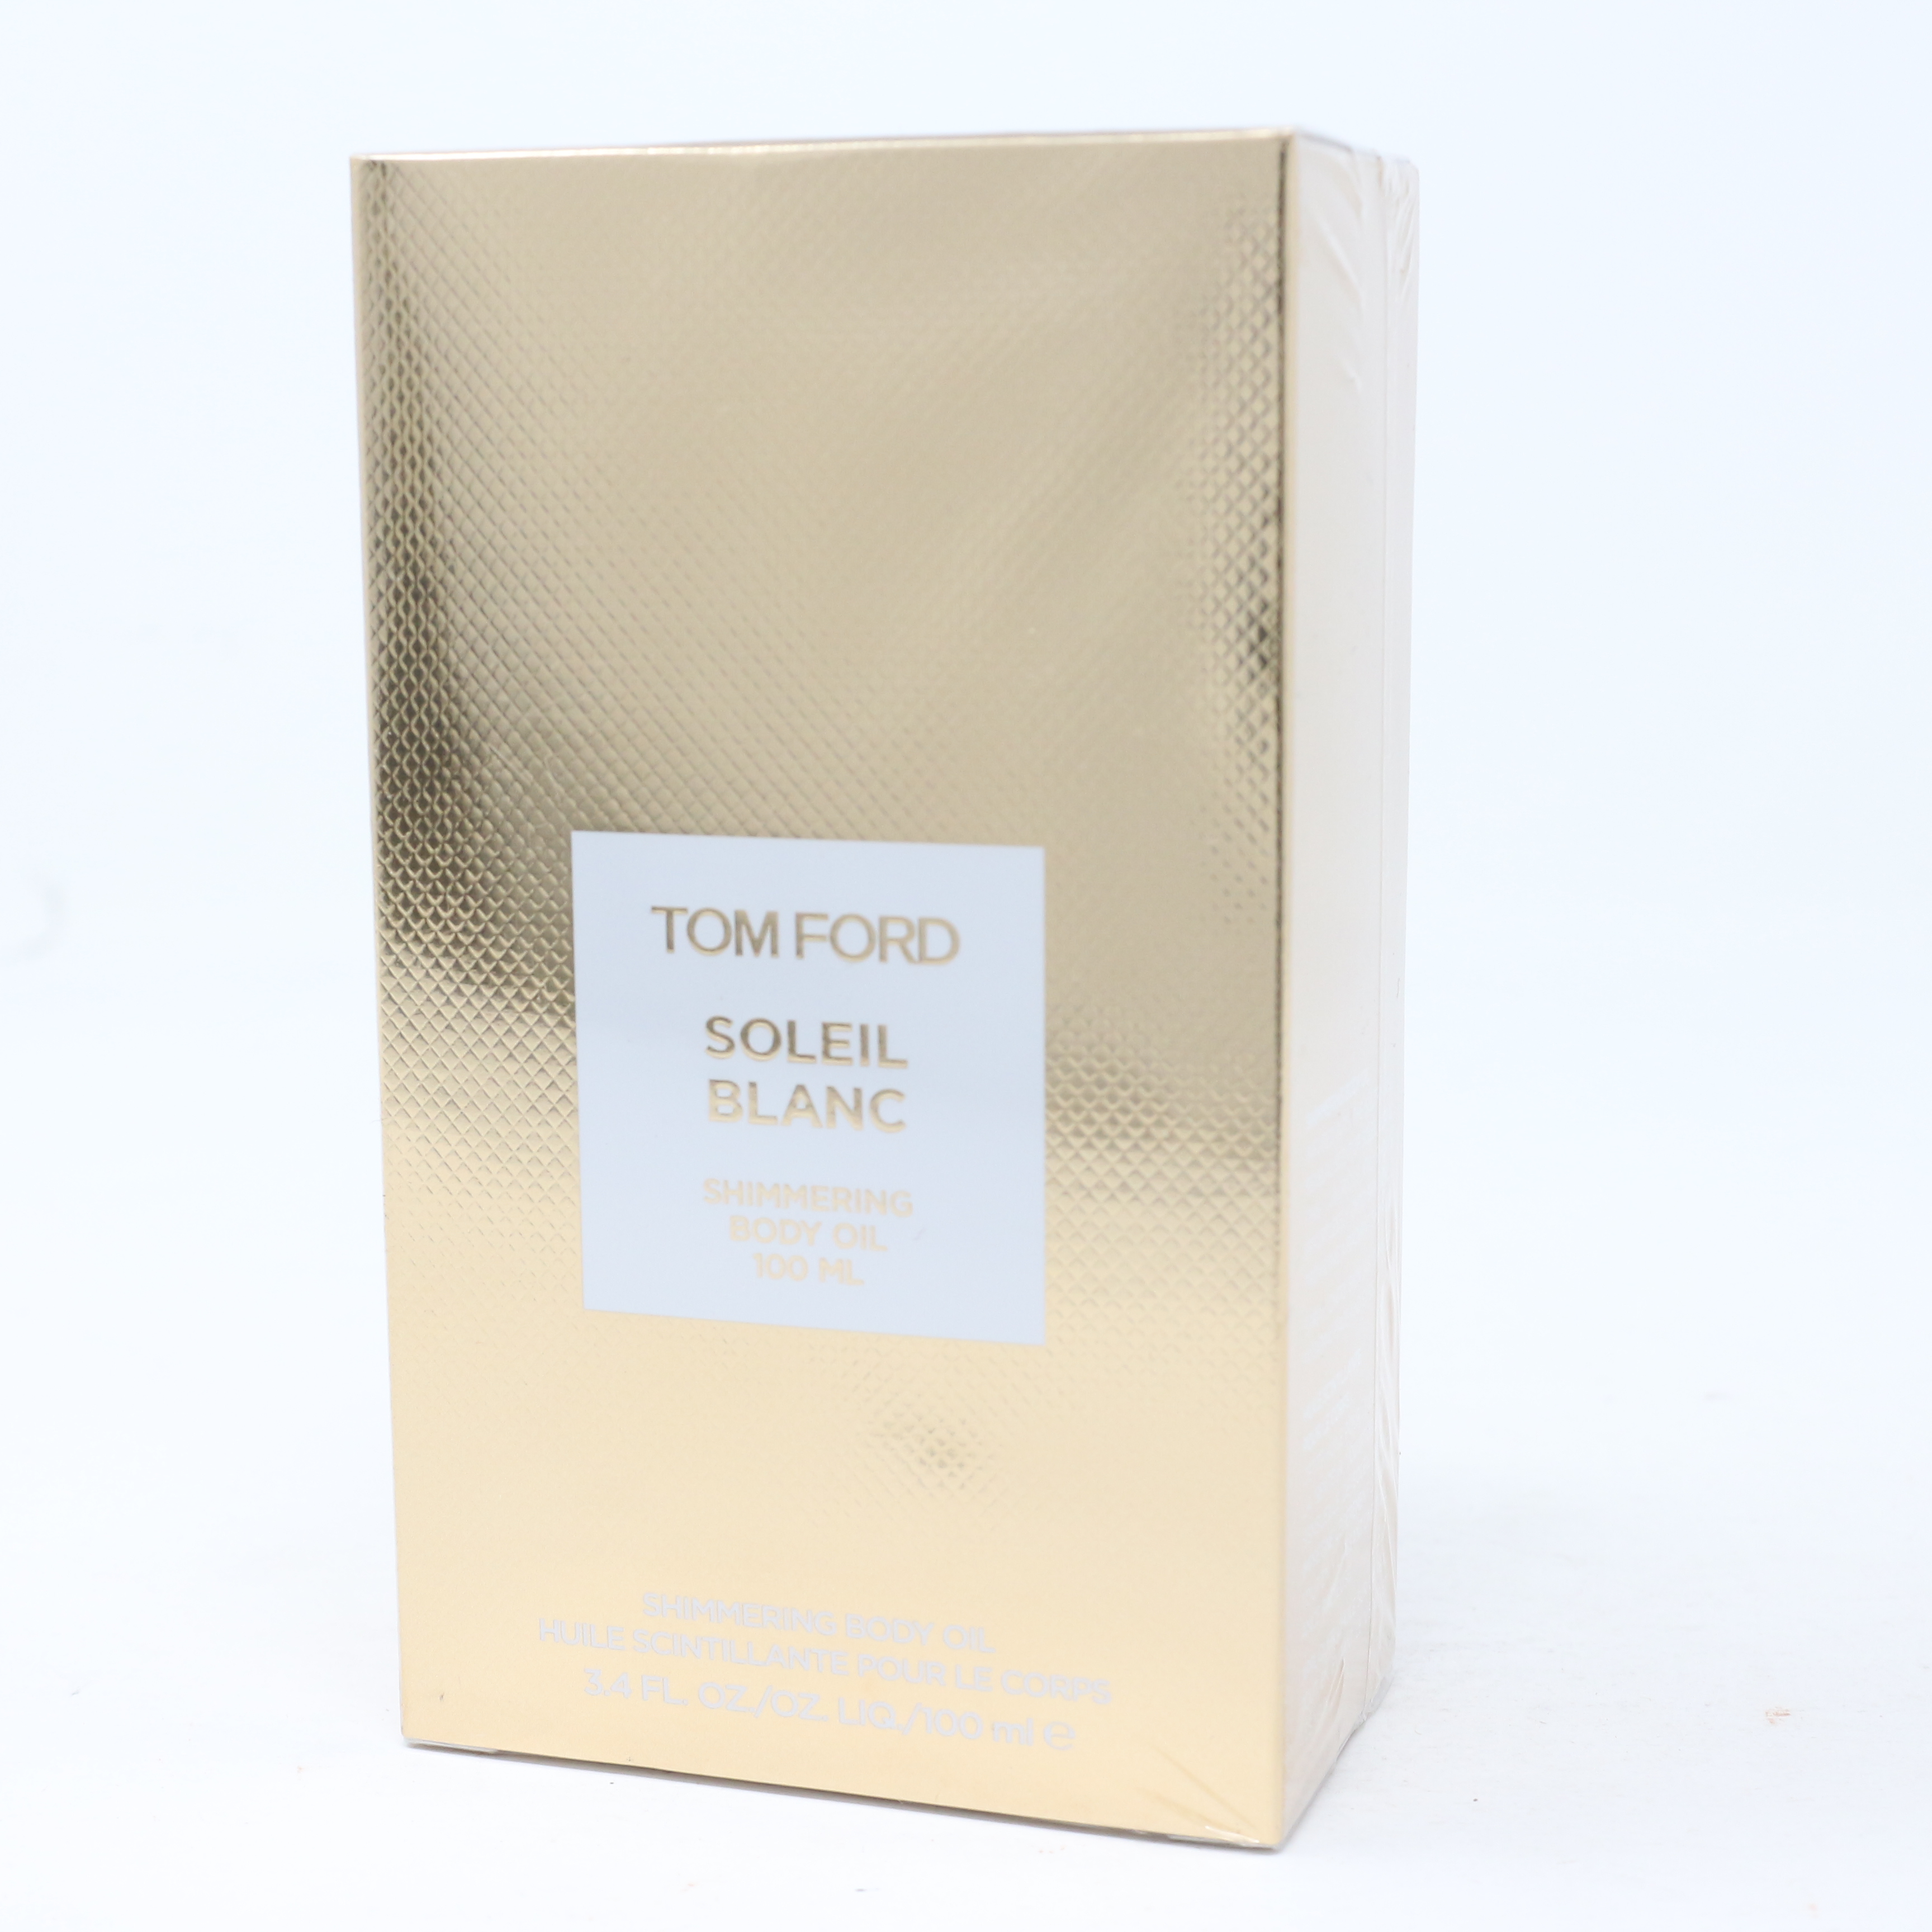 Tom Ford Soleil Blanc Shimmering Body Oil 3.4oz/100ml New With Box